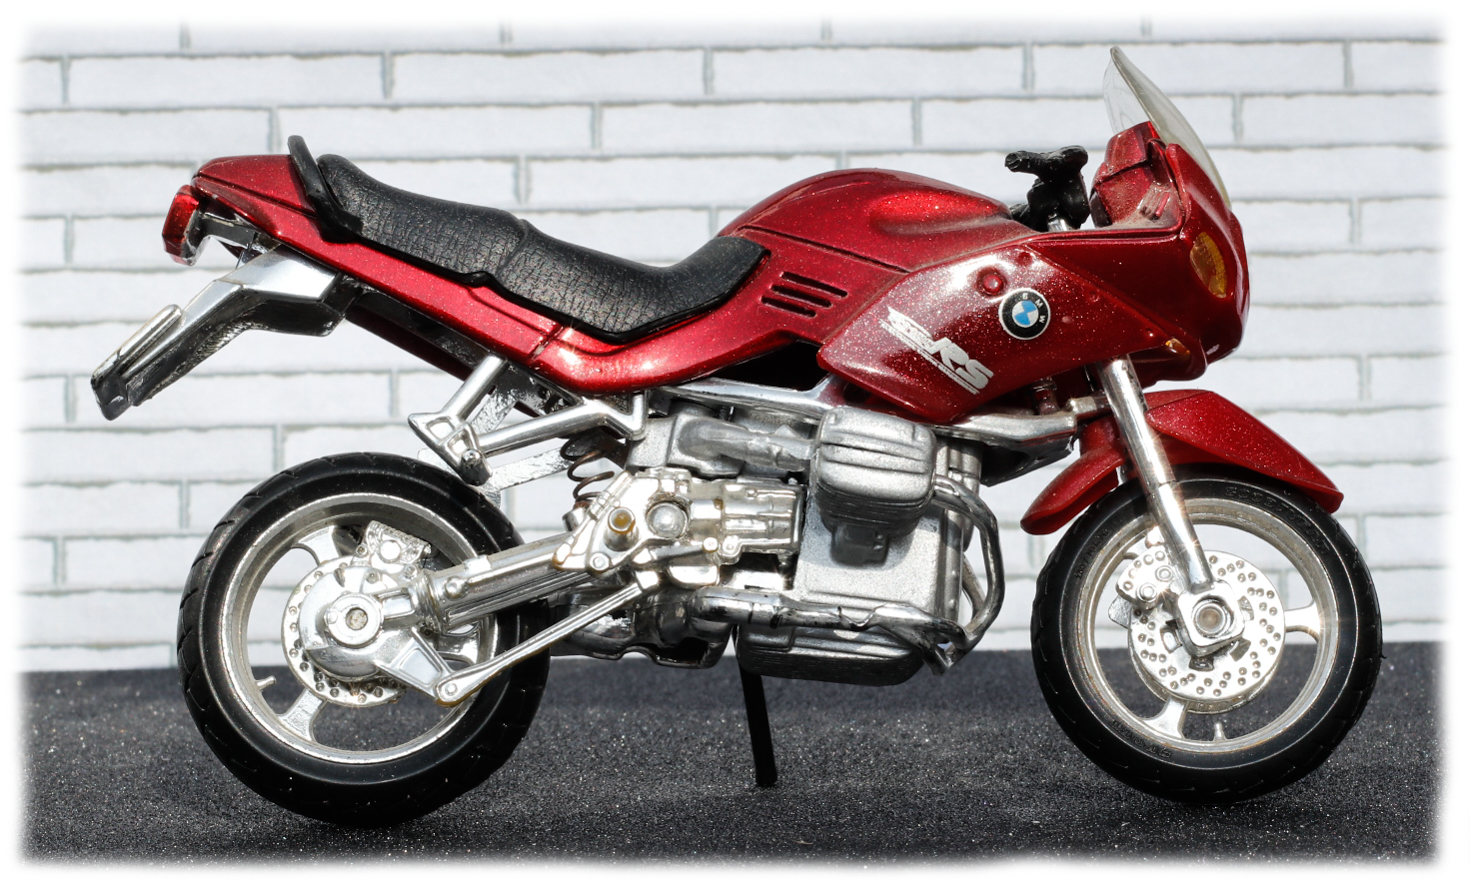 RARE Maisto 1 18 Scale BMW R1100r Red Item # 39309 for sale online 